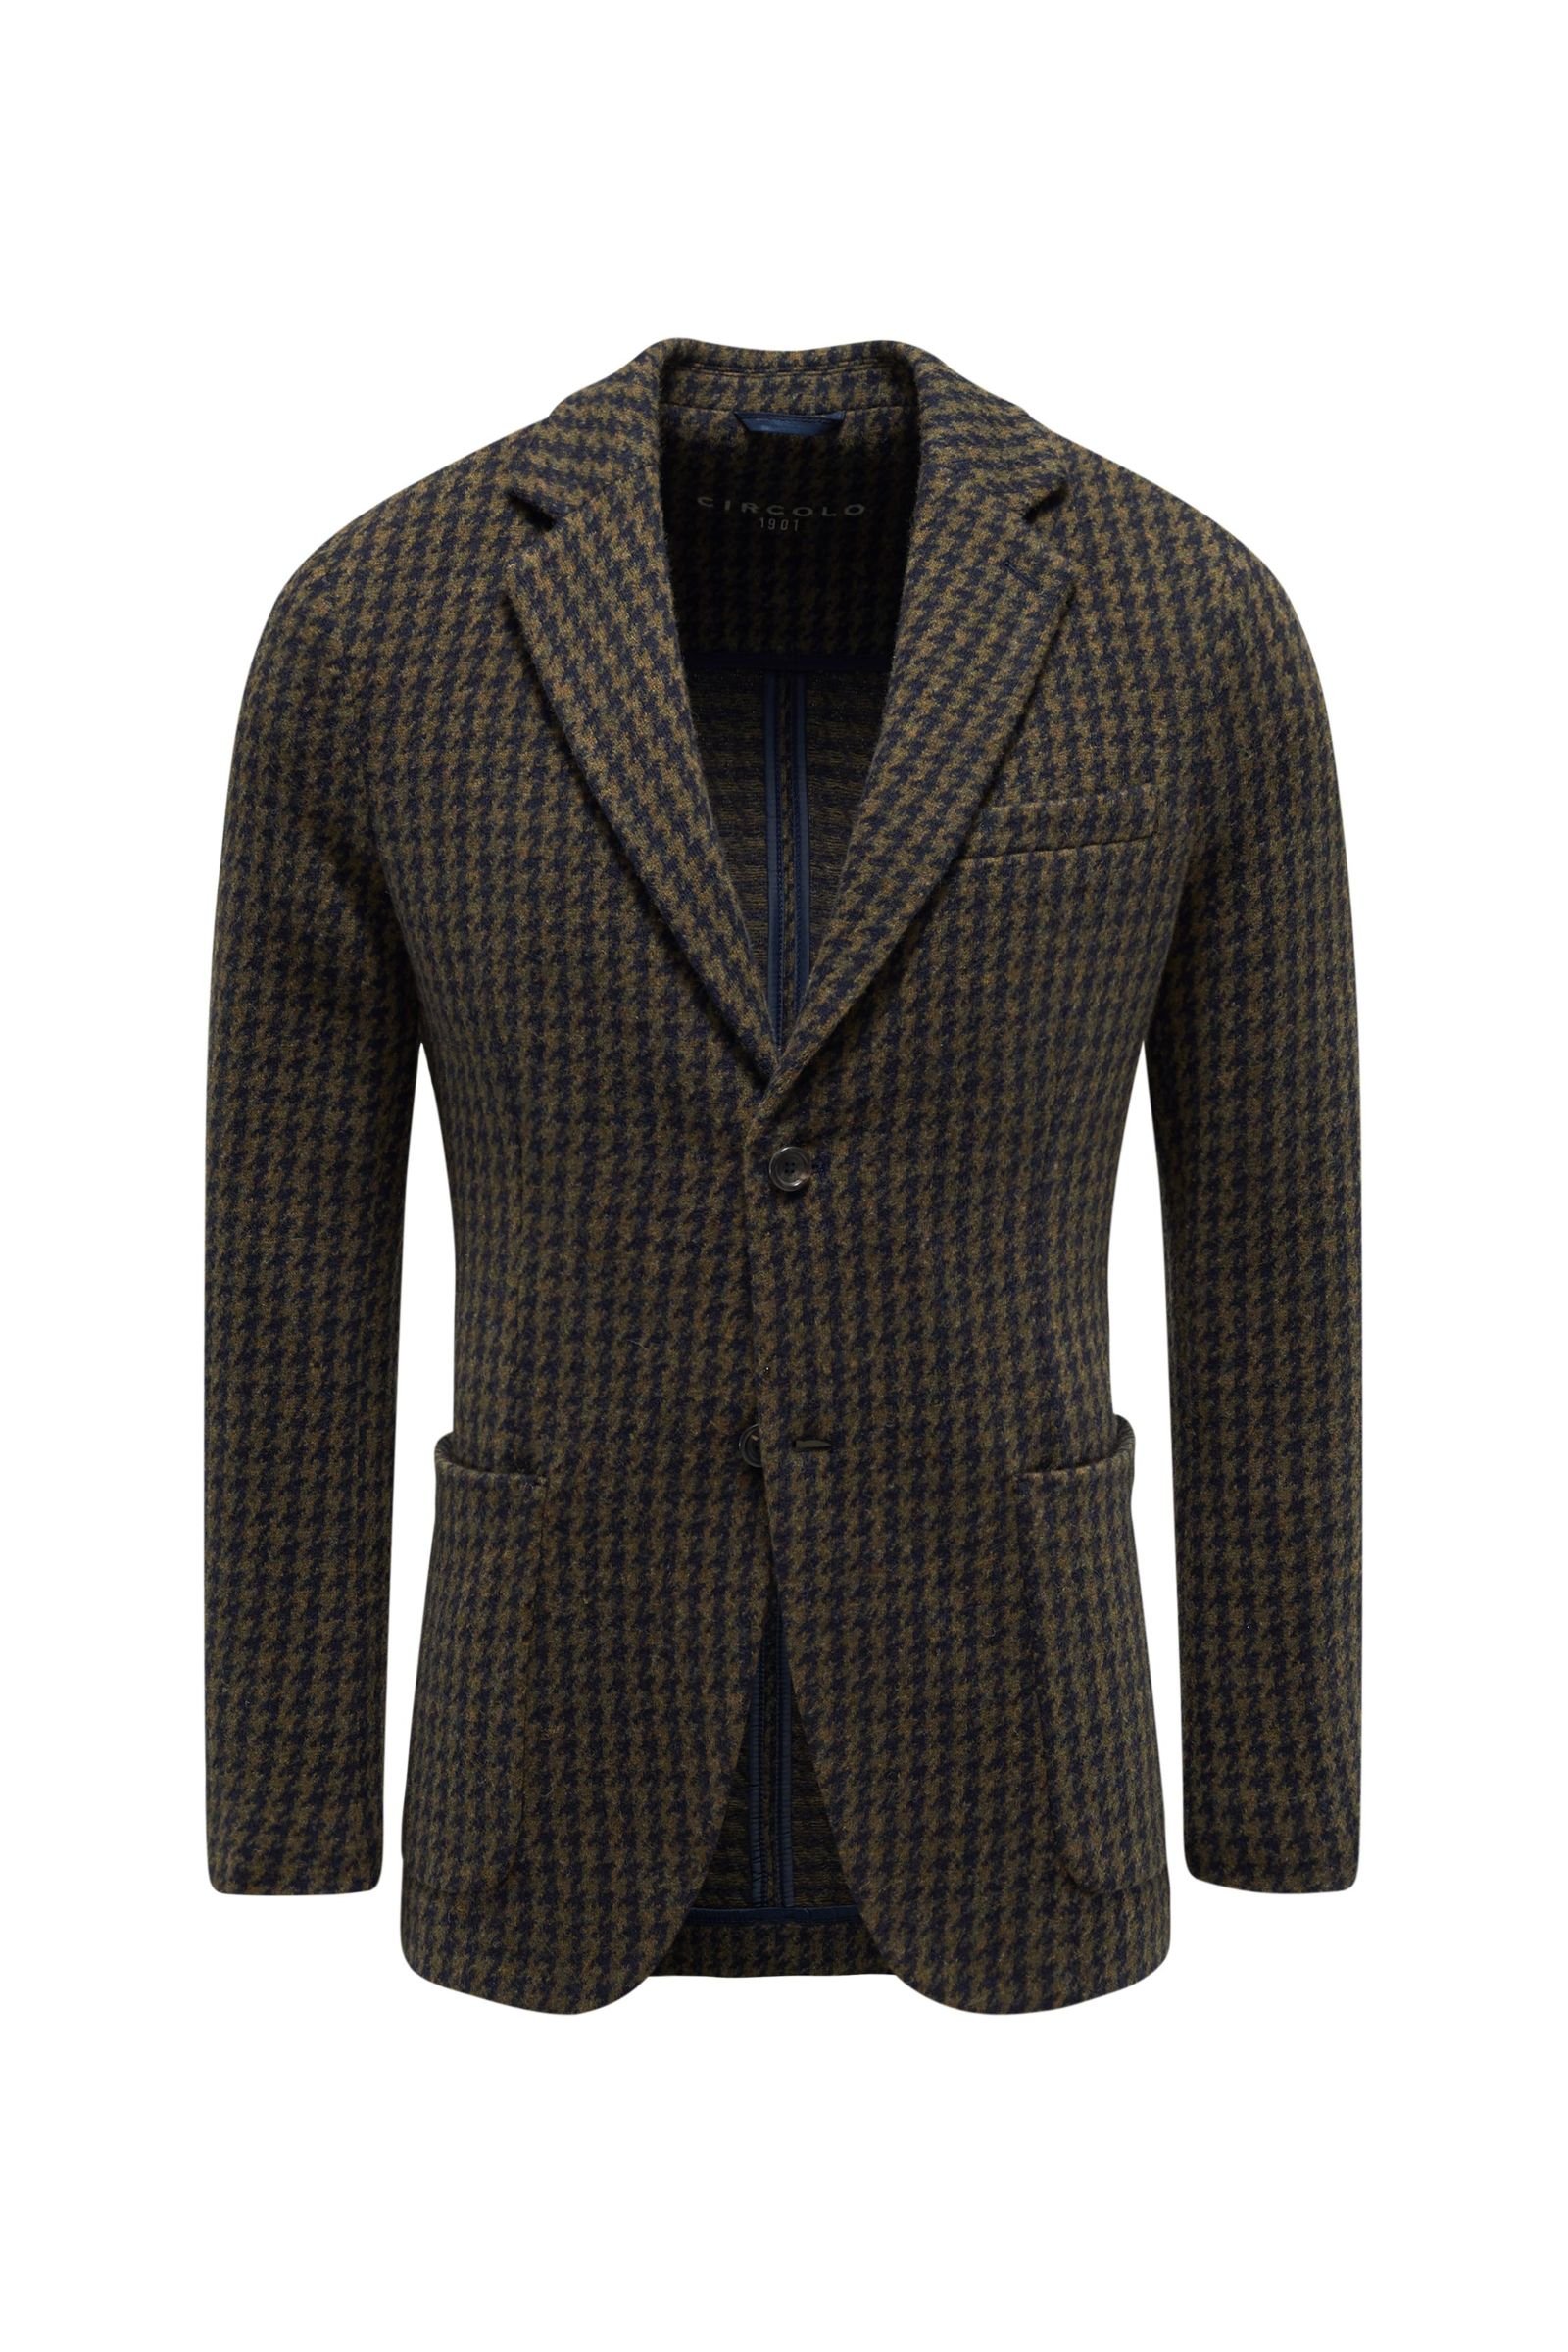 Jersey smart-casual jacket 'Giacca' olive checked